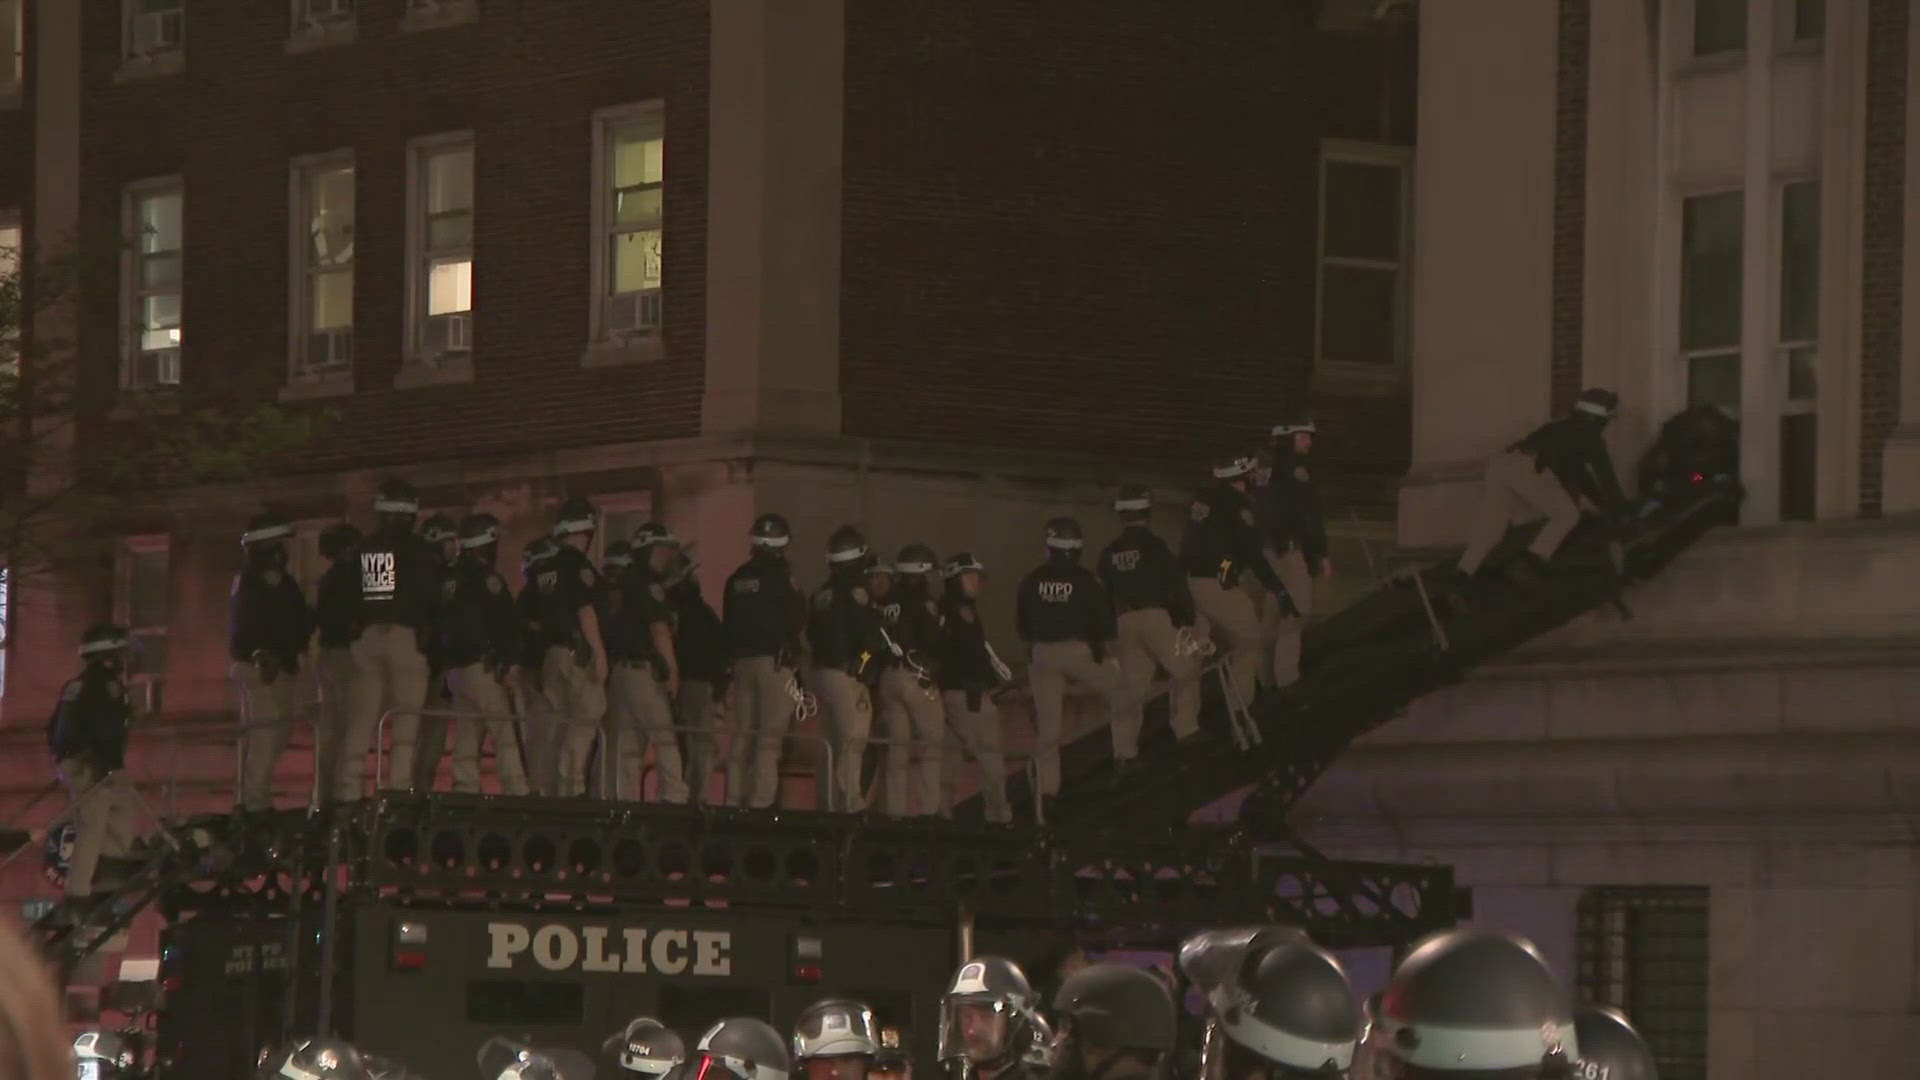 Columbia University issued a shelter-in-place order Tuesday evening as scores of police officers in riot gear swarmed near the New York campus.